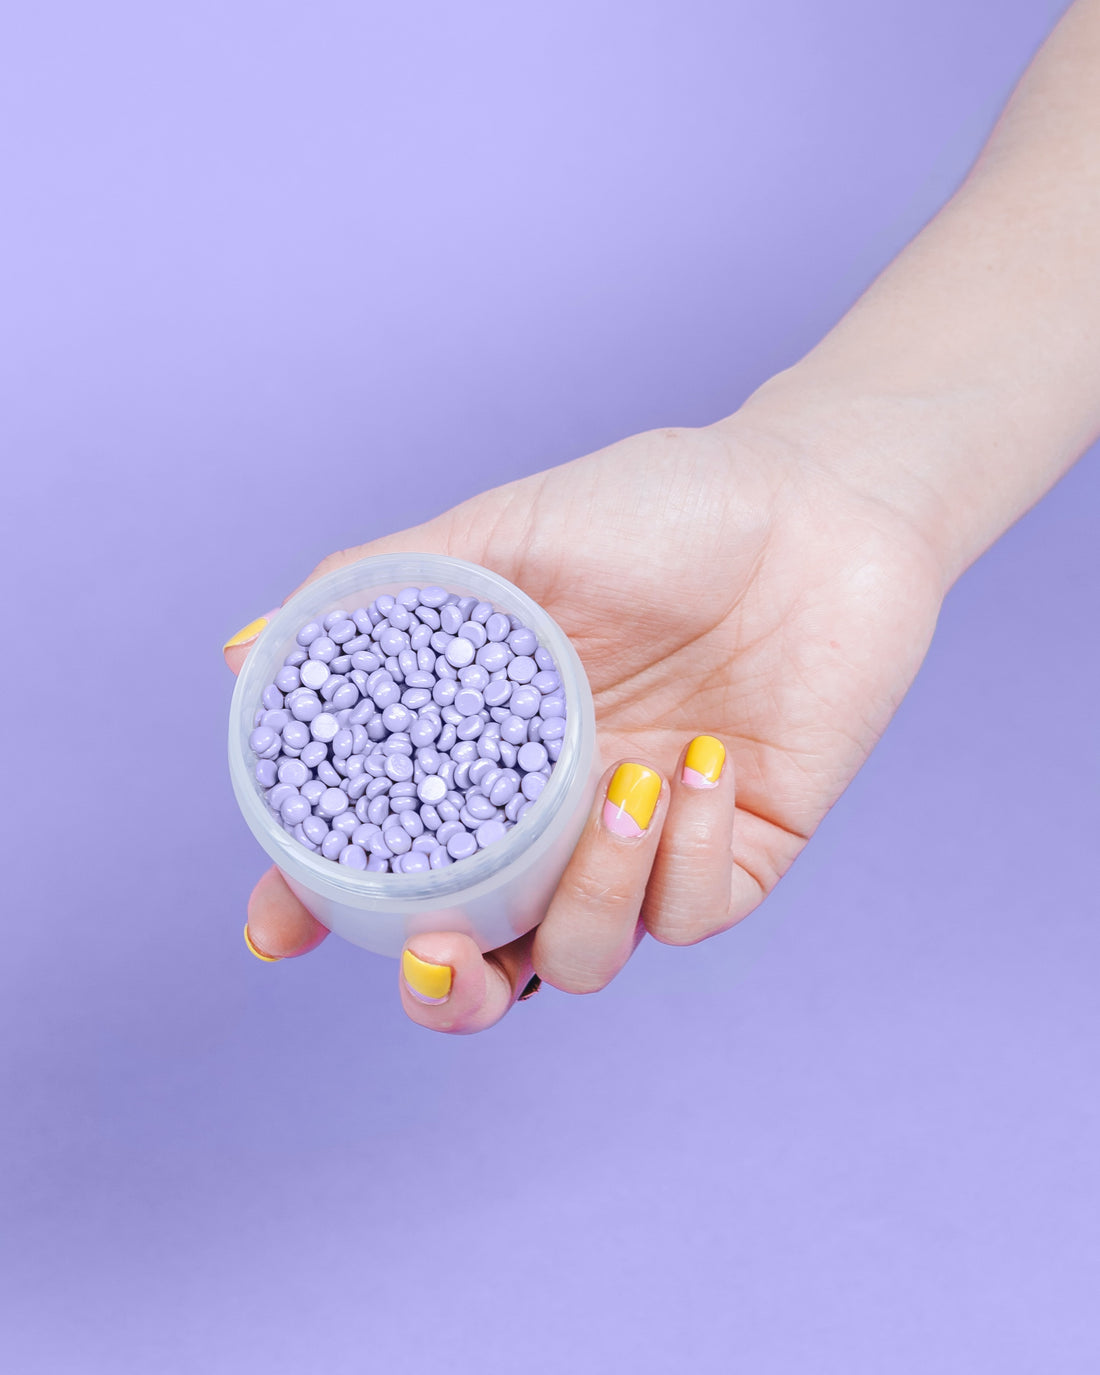 How to Use Waxing Beads